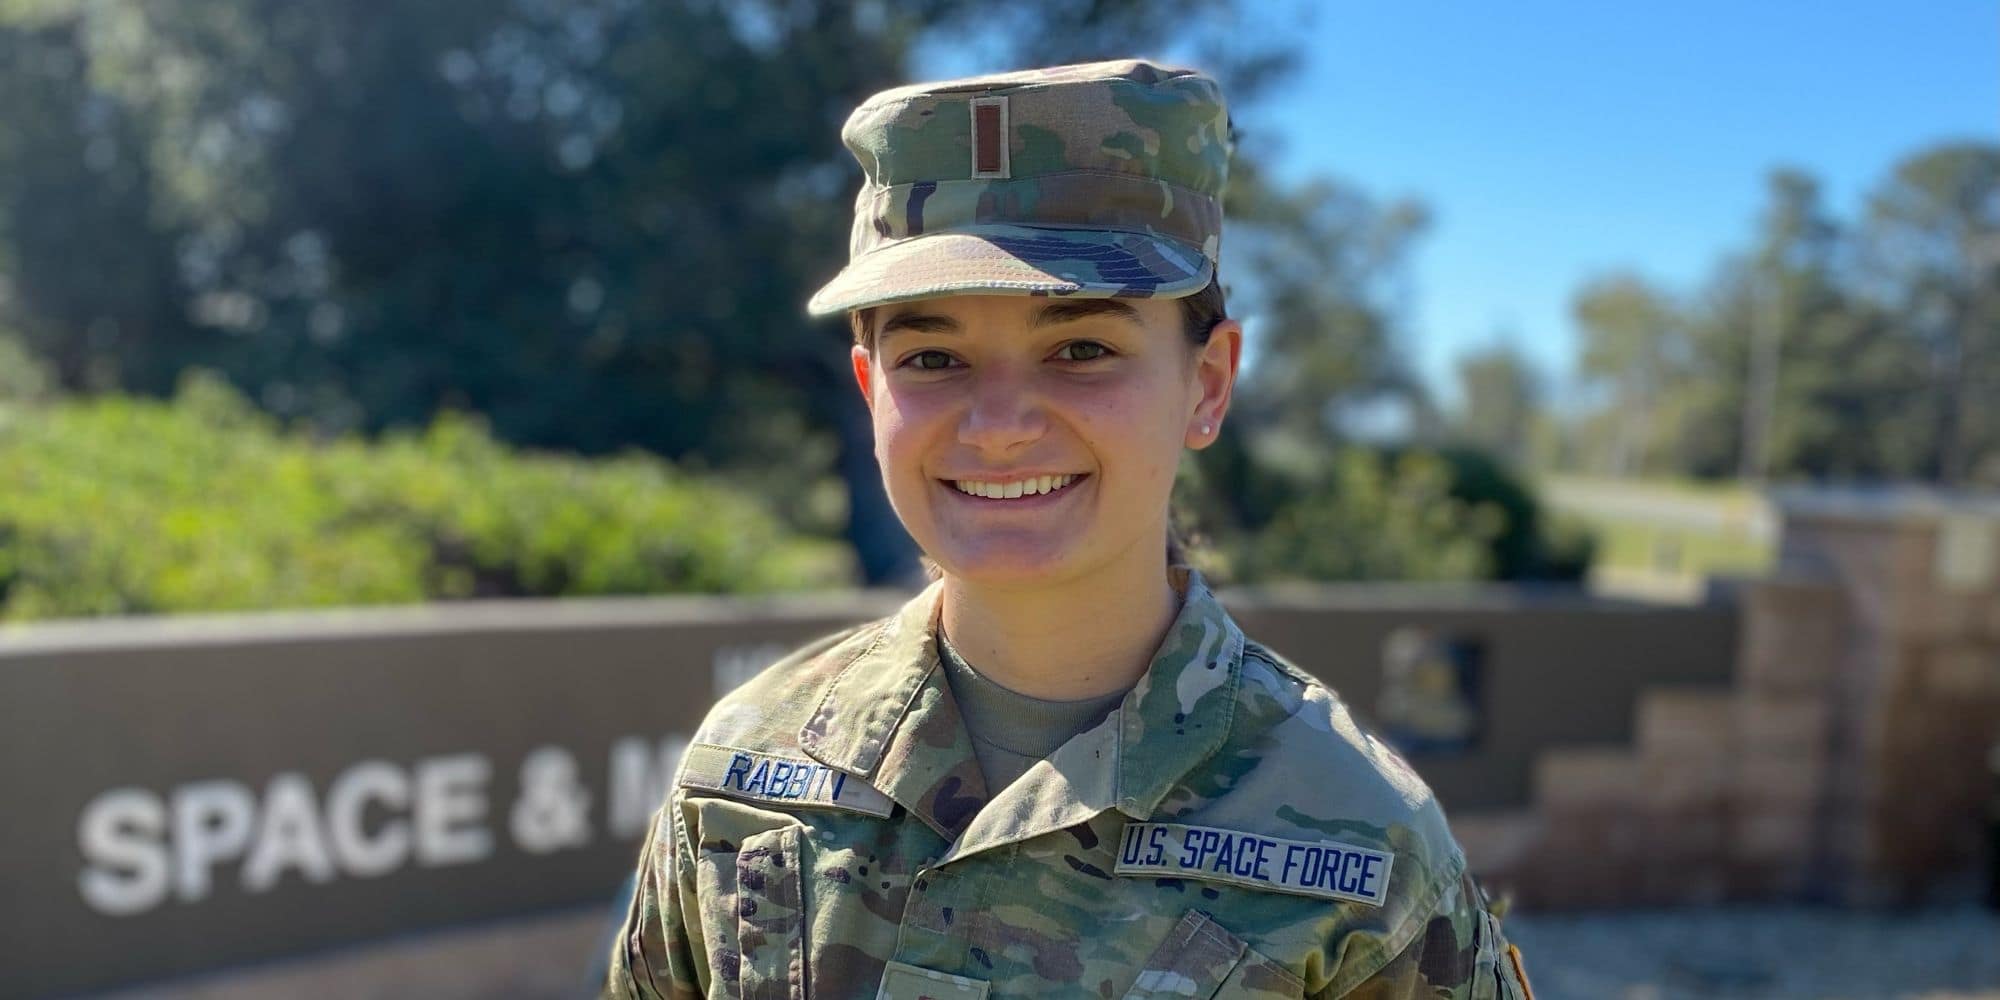 Lt. Joselyn Rabbitt ('21) begins her active-duty commission in the U.S. Space Force at California's Vandenberg Space Force Base. (Photo: Joselyn Rabbitt)